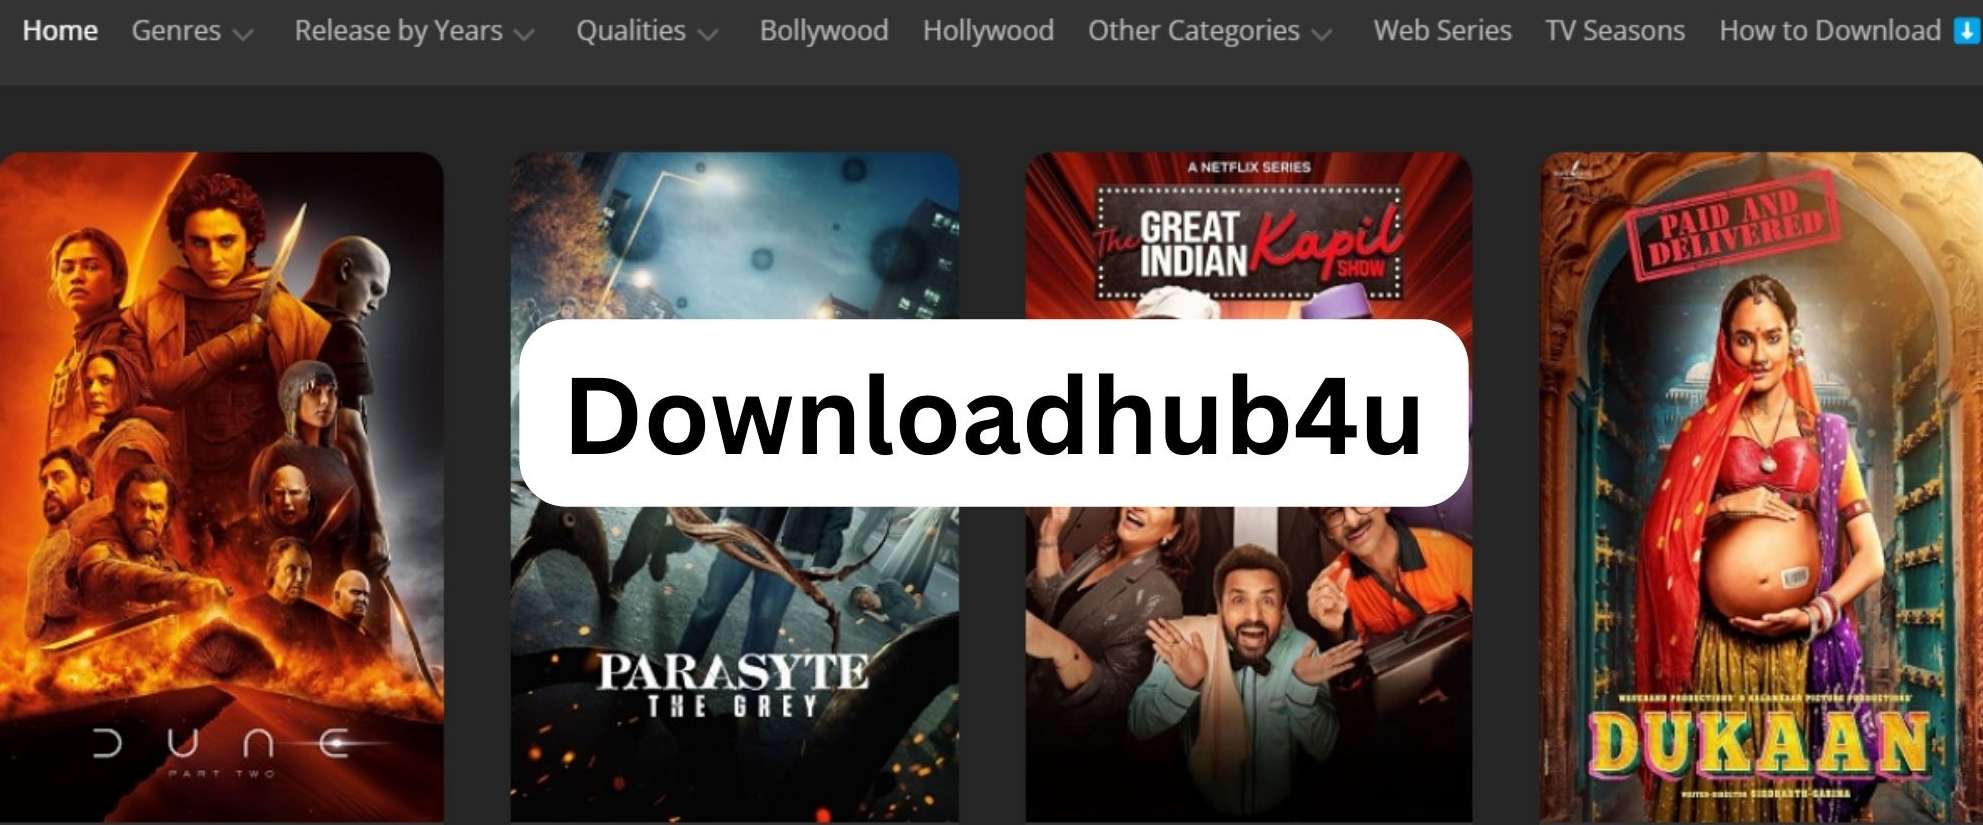 Downloadhub4u: Legal Implications and Security Measures Explained